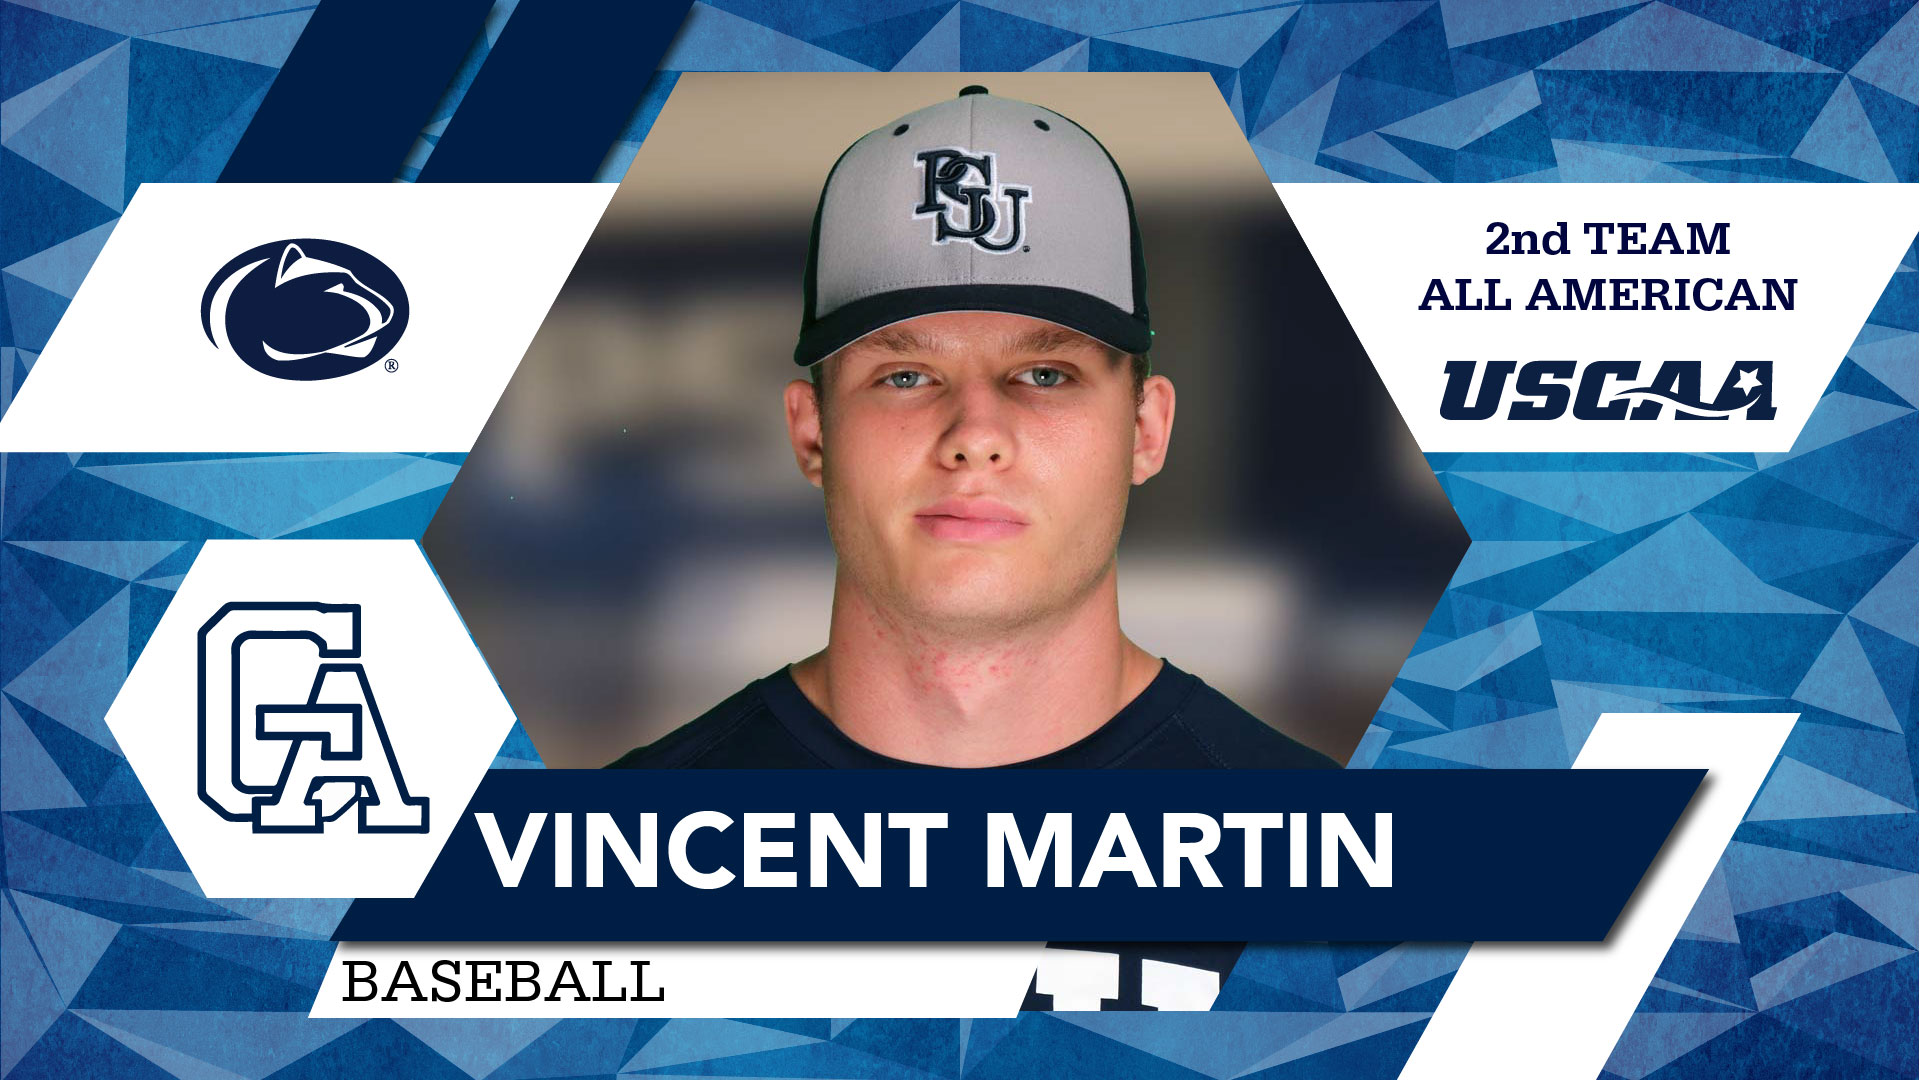 Painter and Martin Earn 2nd Team USCAA All American Honors